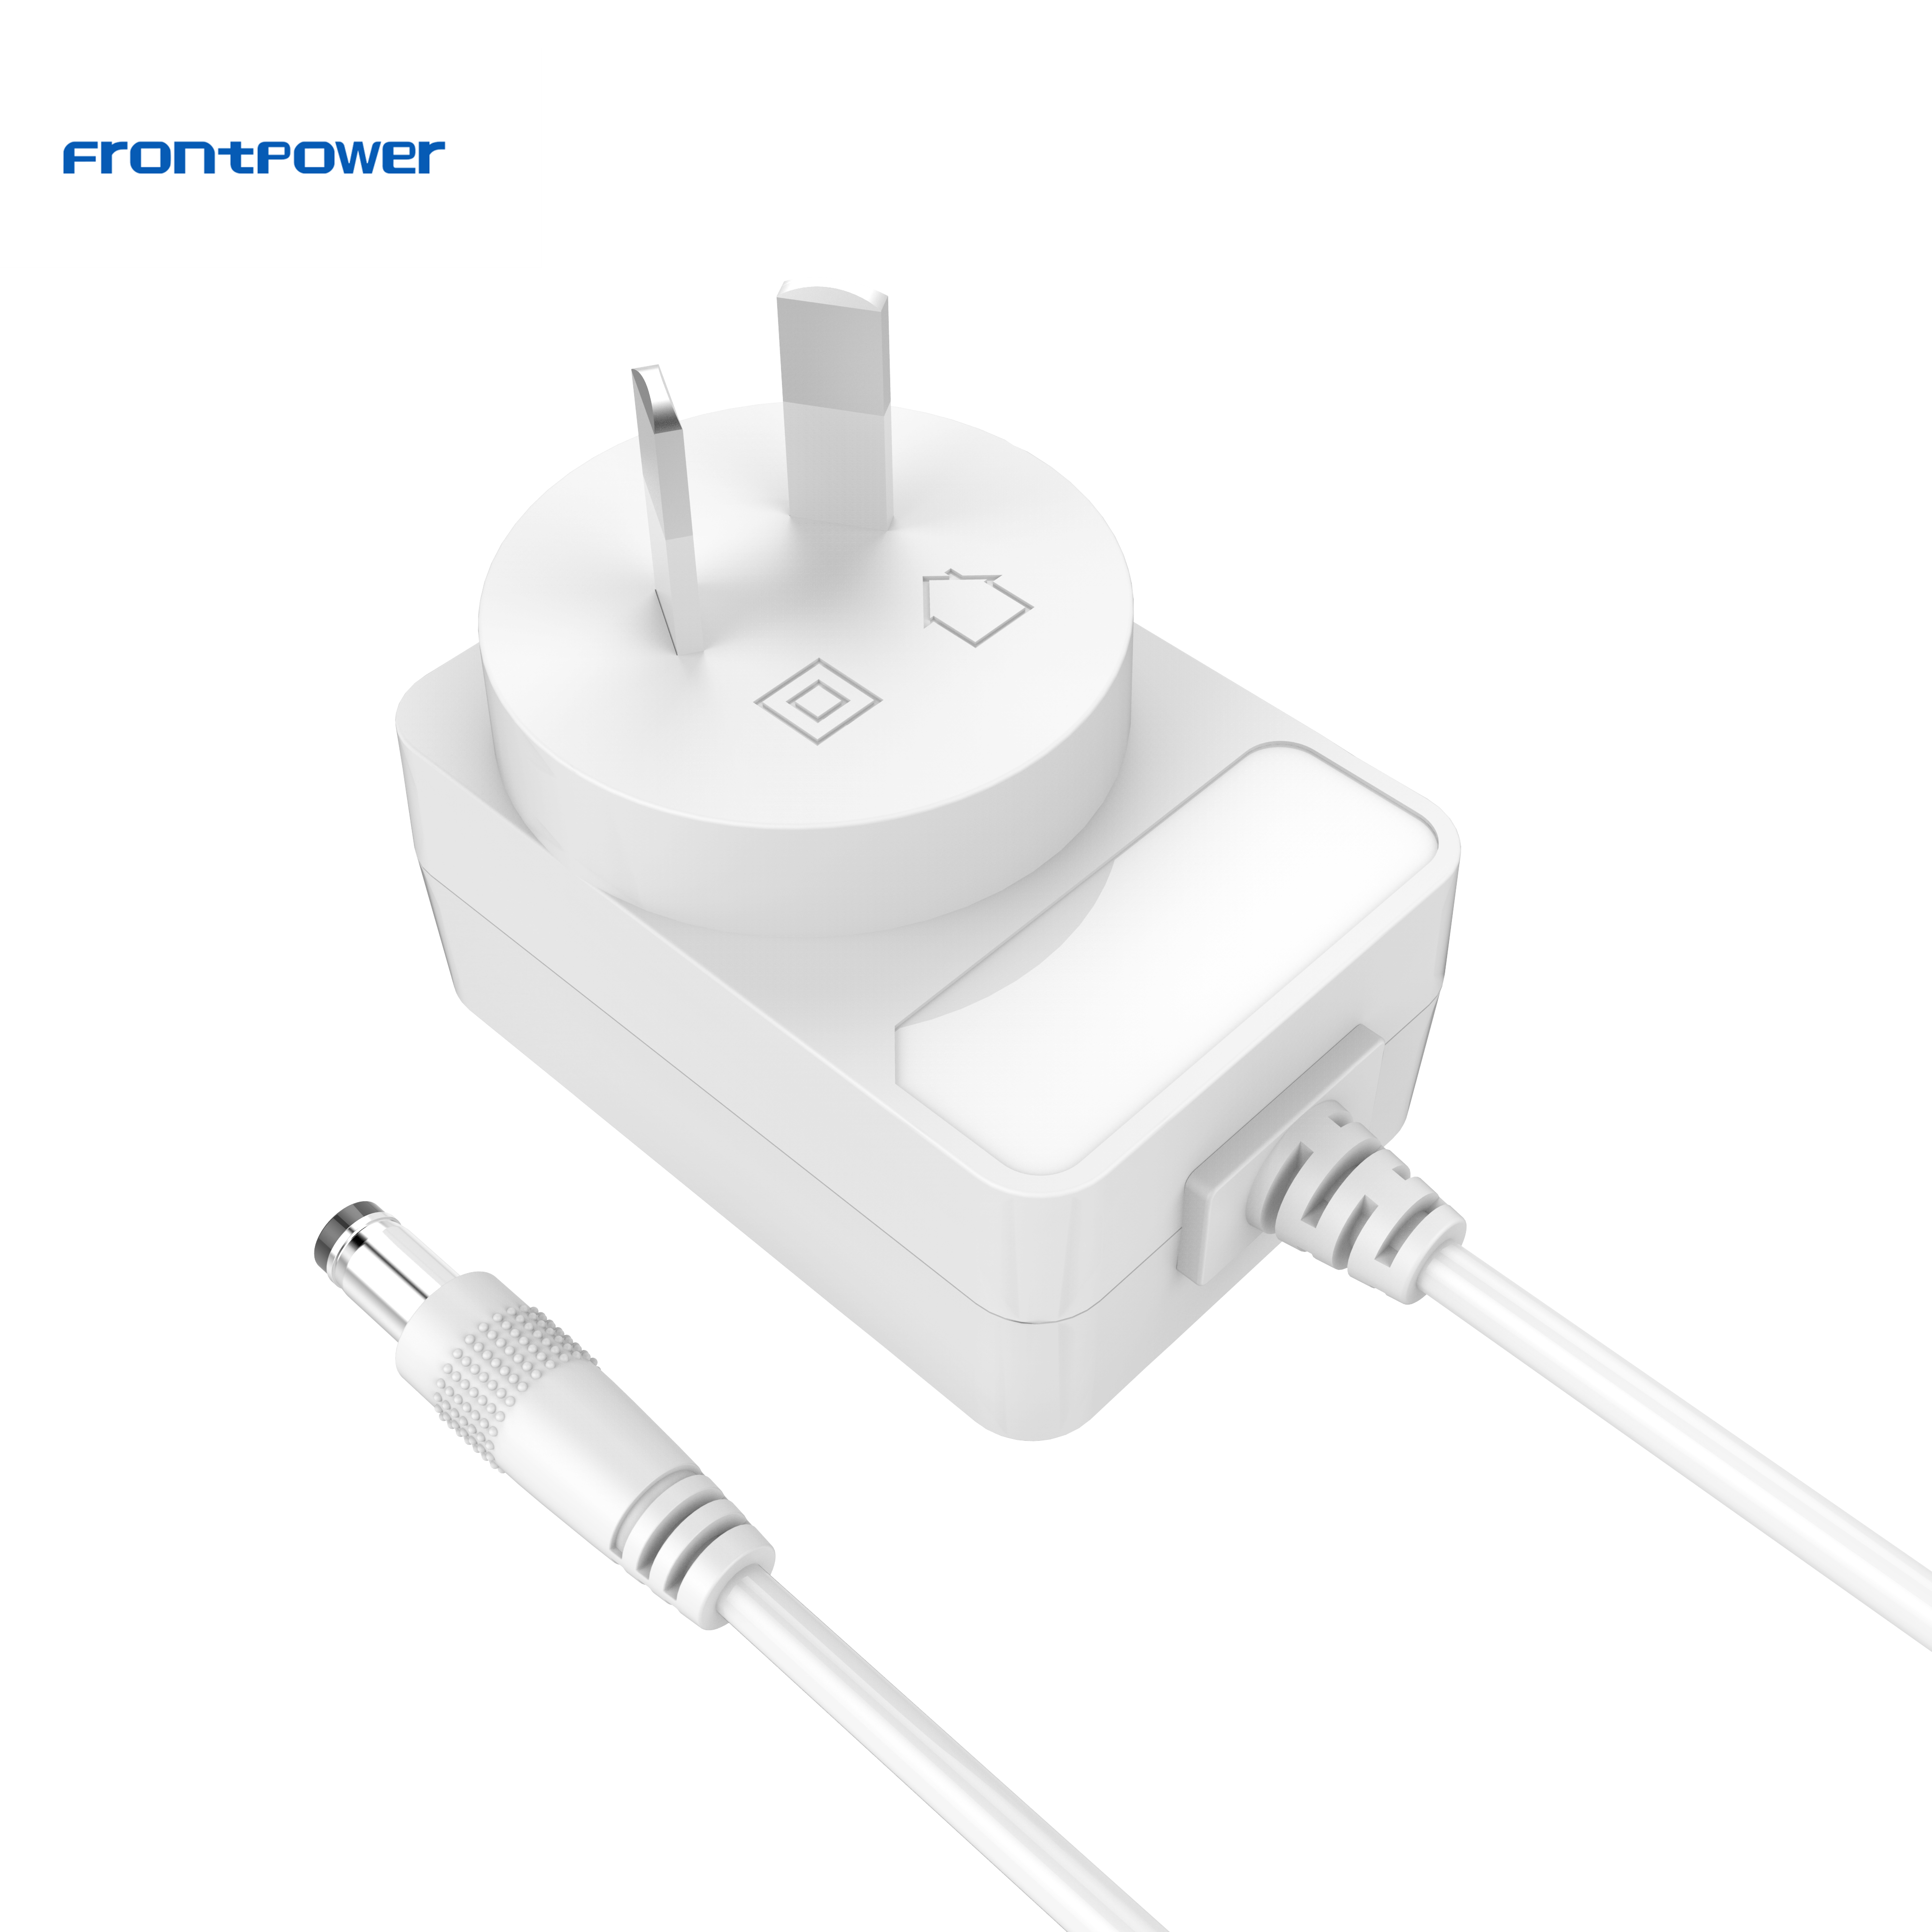 Frontpower adapter ECAS certificate 12W 5V 2.5A 5V 2A 6V 1A 6V 2A 8V 1.5A wall plug fixed type adapter